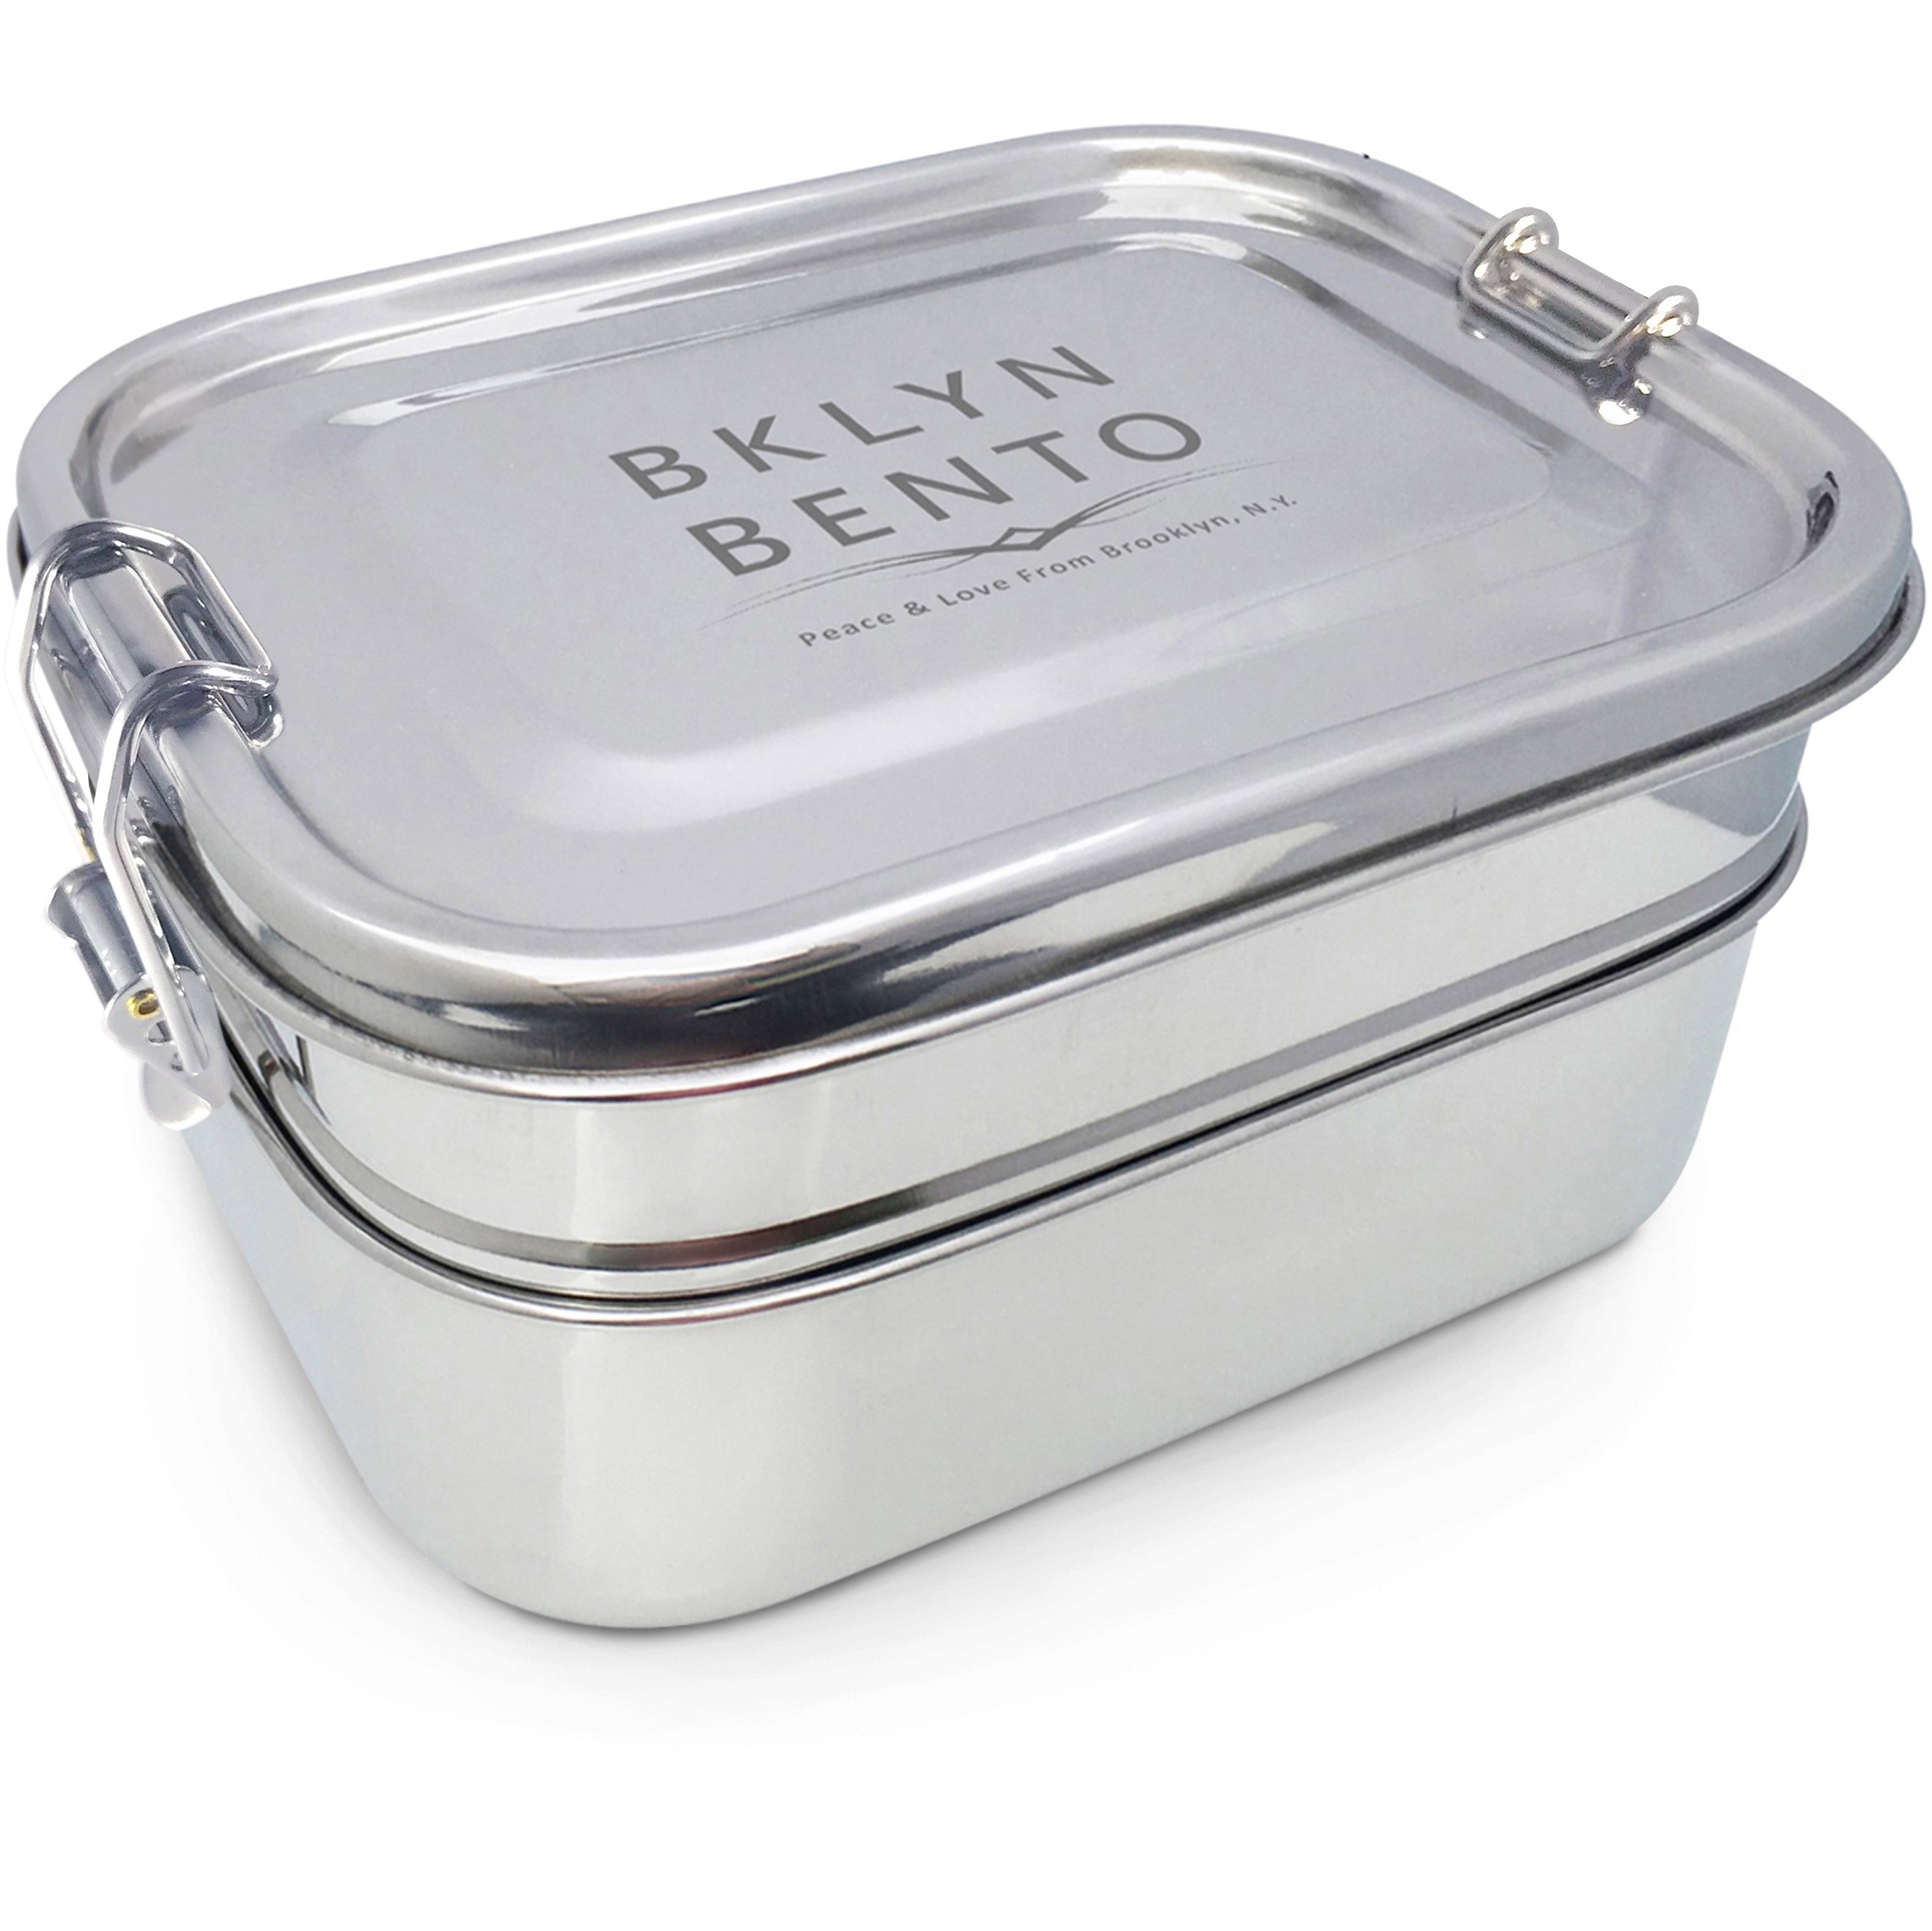 Bklyn Bento Box 100% Stainless Steel Lunch Box For Kids And Adults 3 in 1 - Metal Food Container